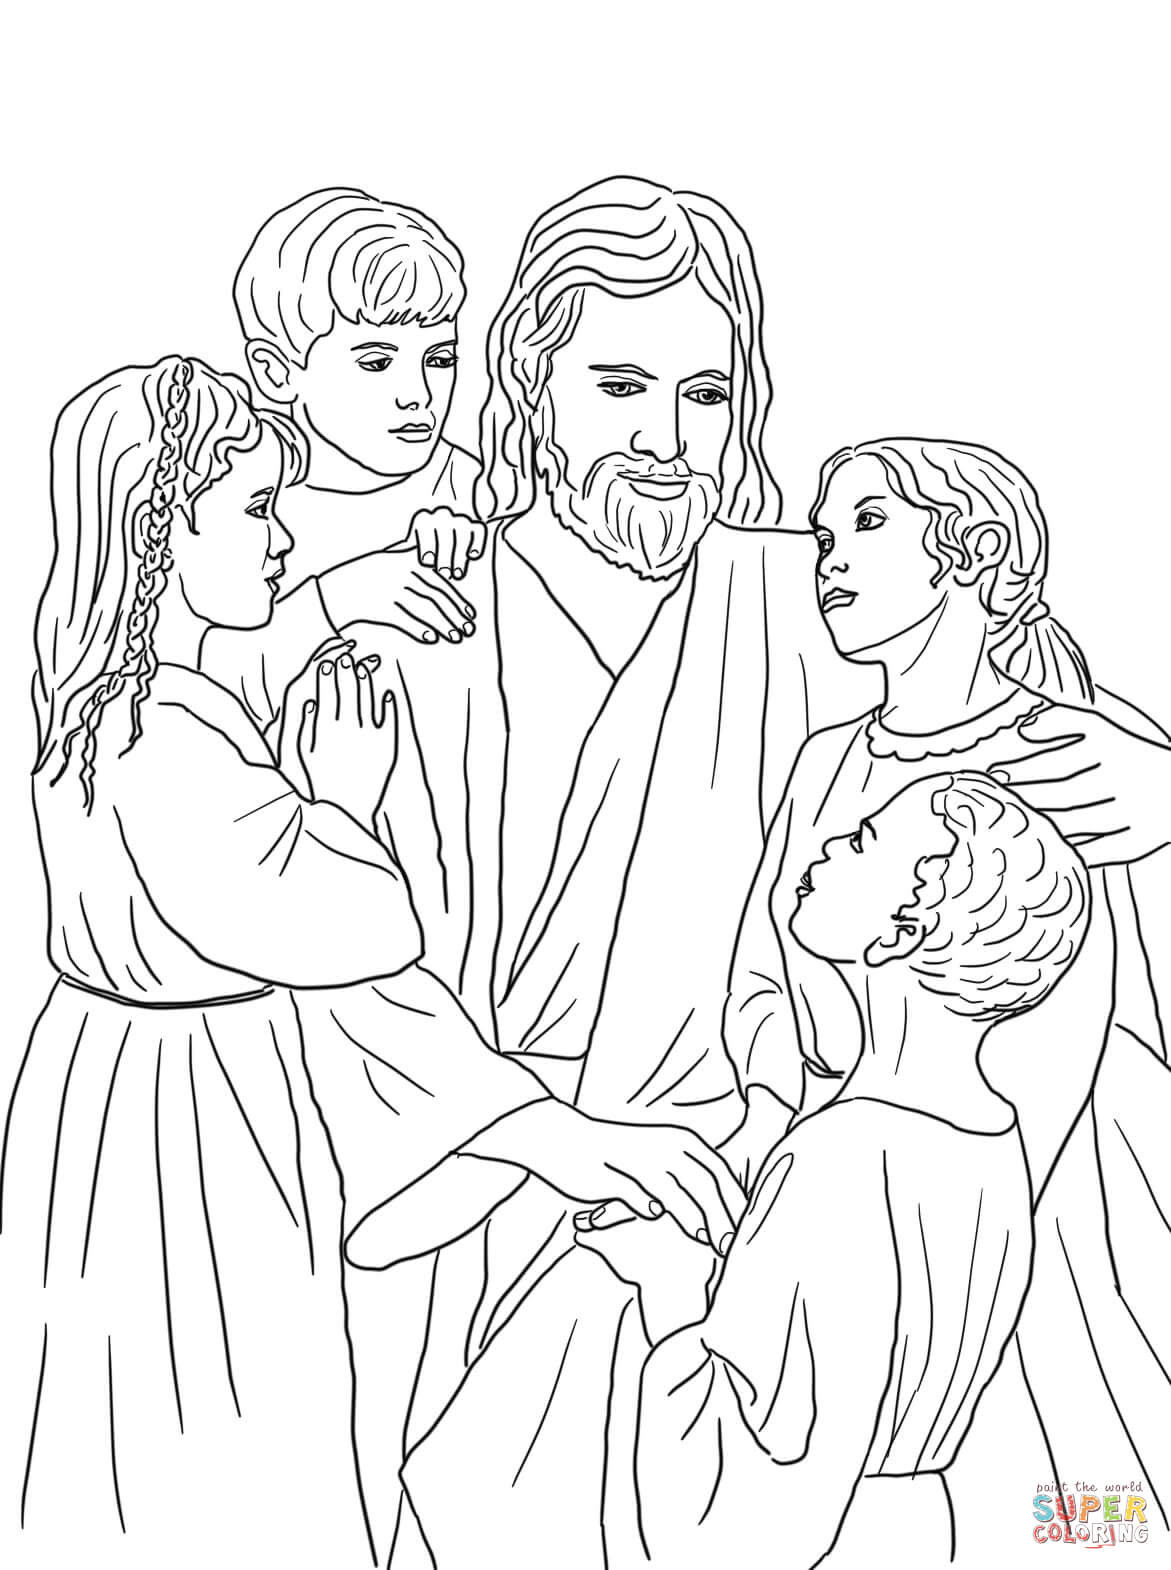 Jesus And The Children Coloring Pages
 Jesus Loves All the Children of the World coloring page